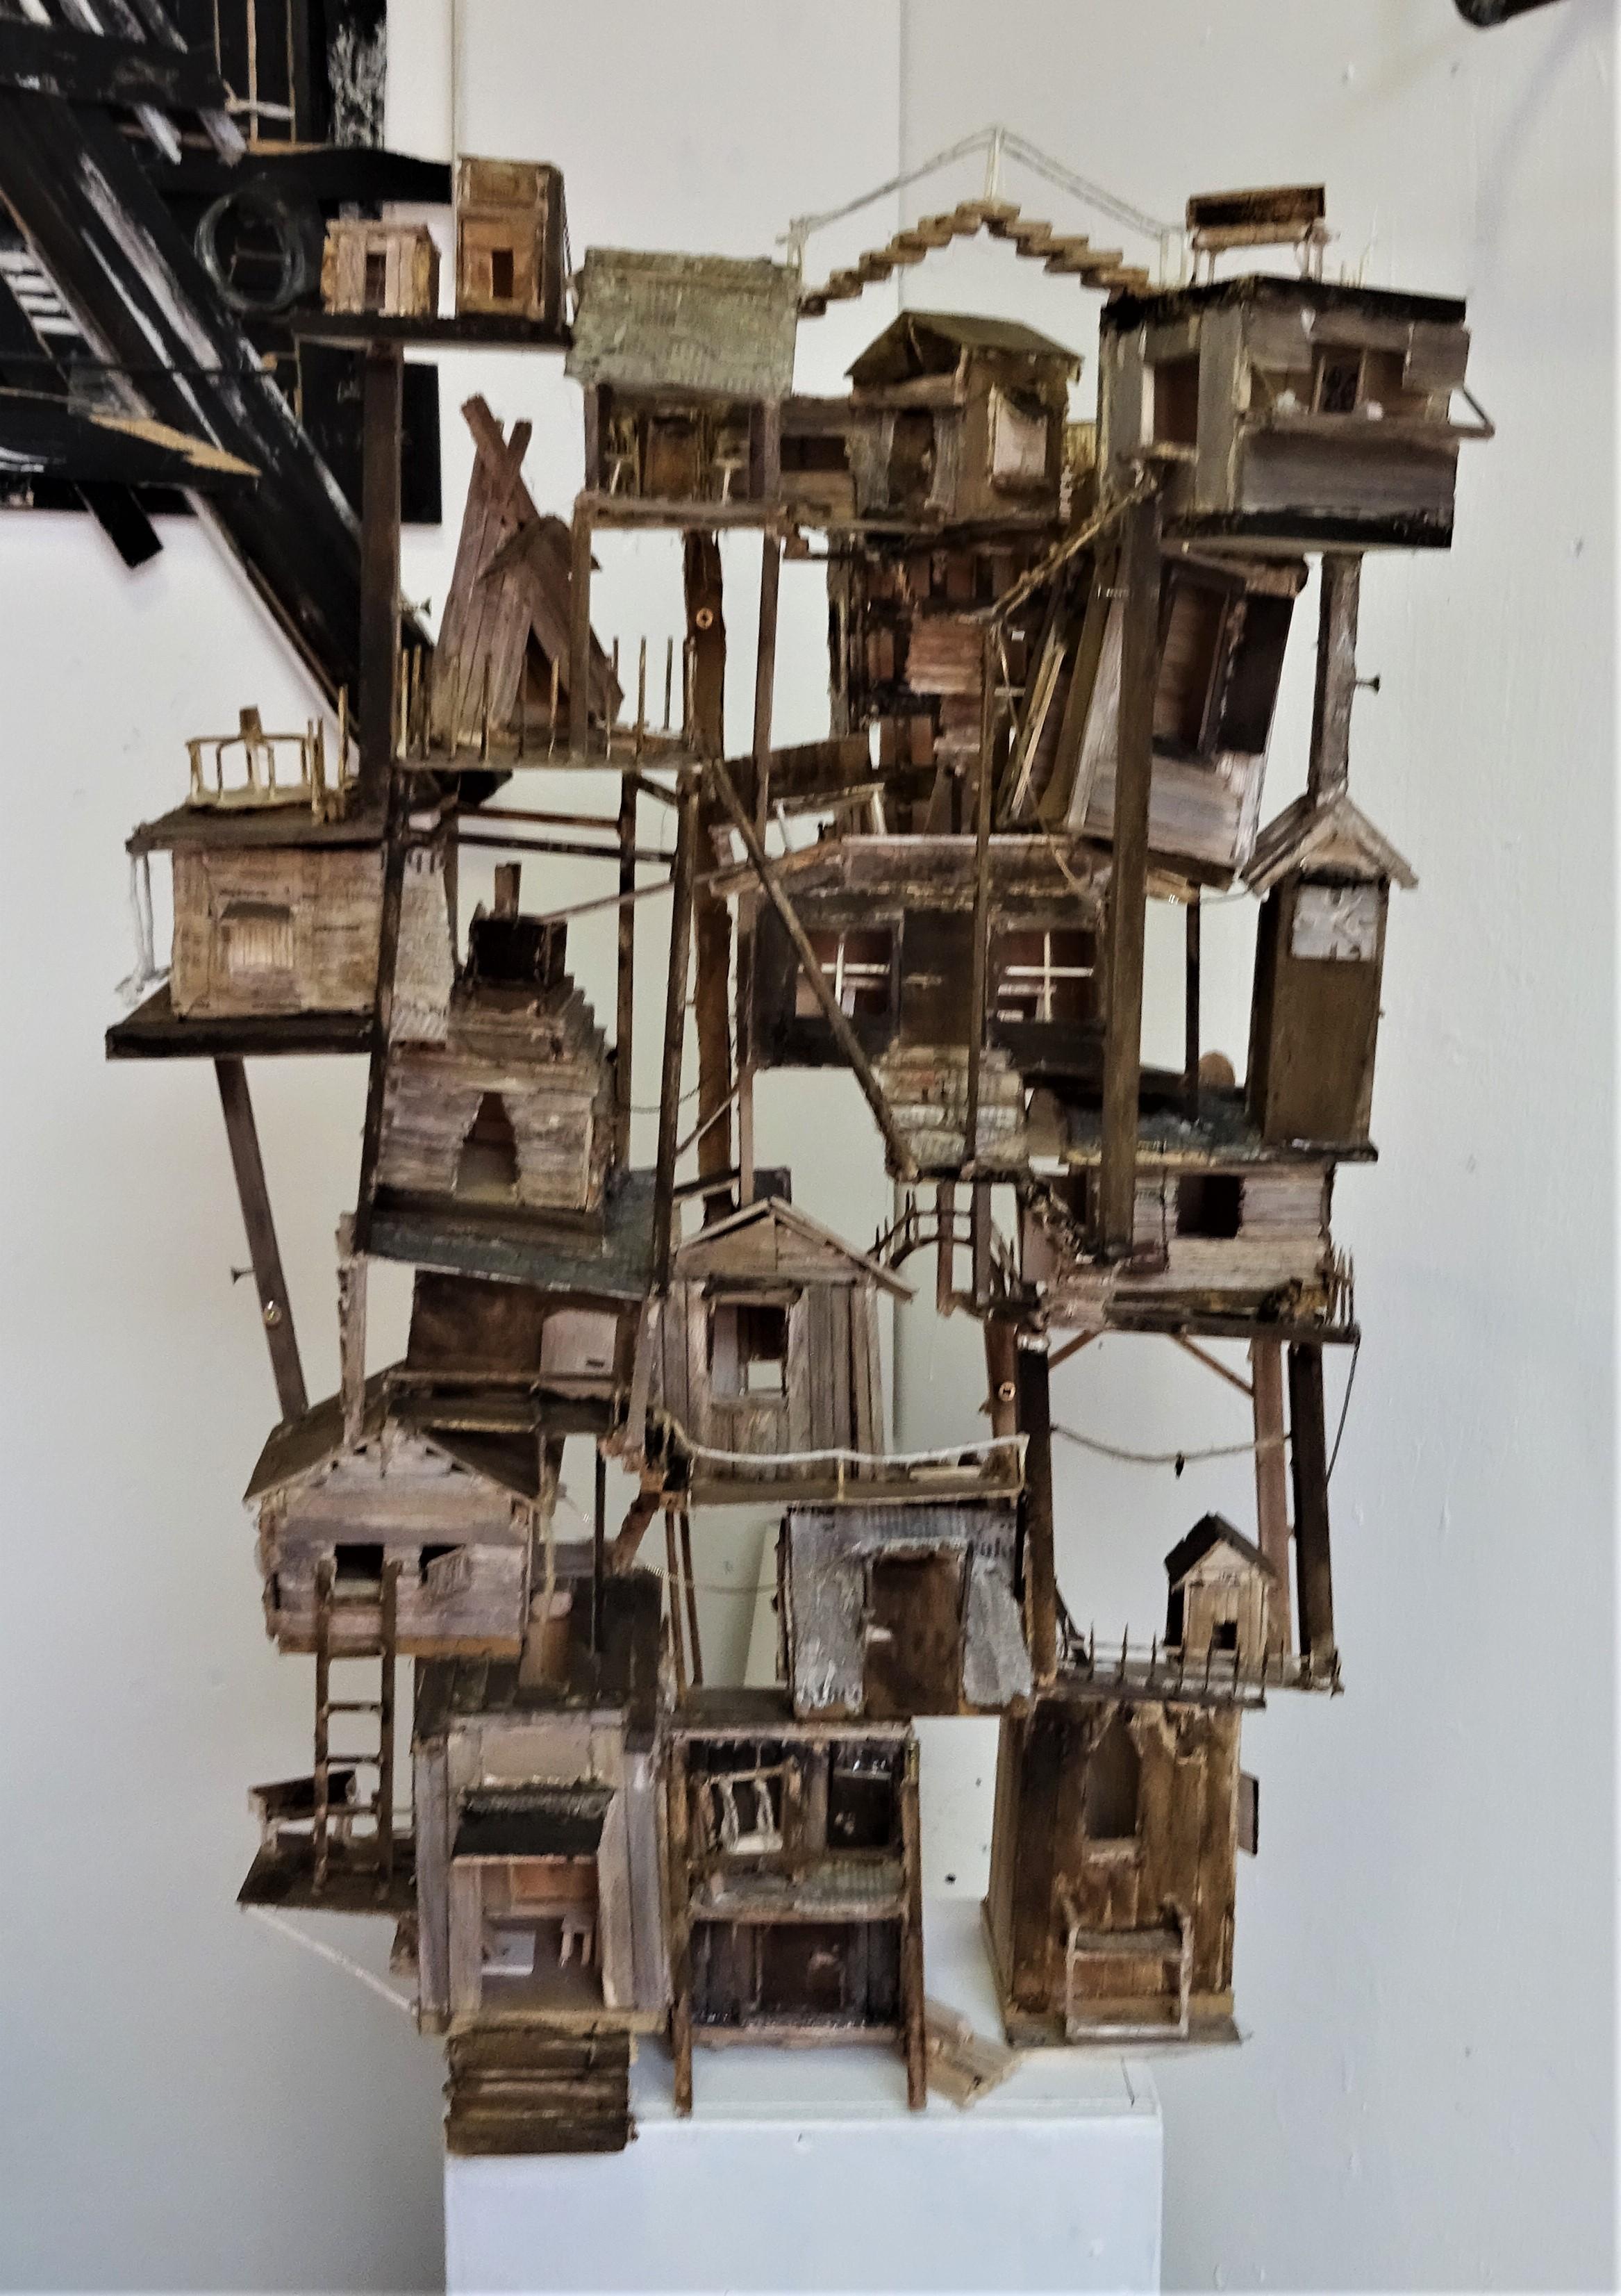 A mixed media model of lots of houses stacked on top of each other in an intricate formation 